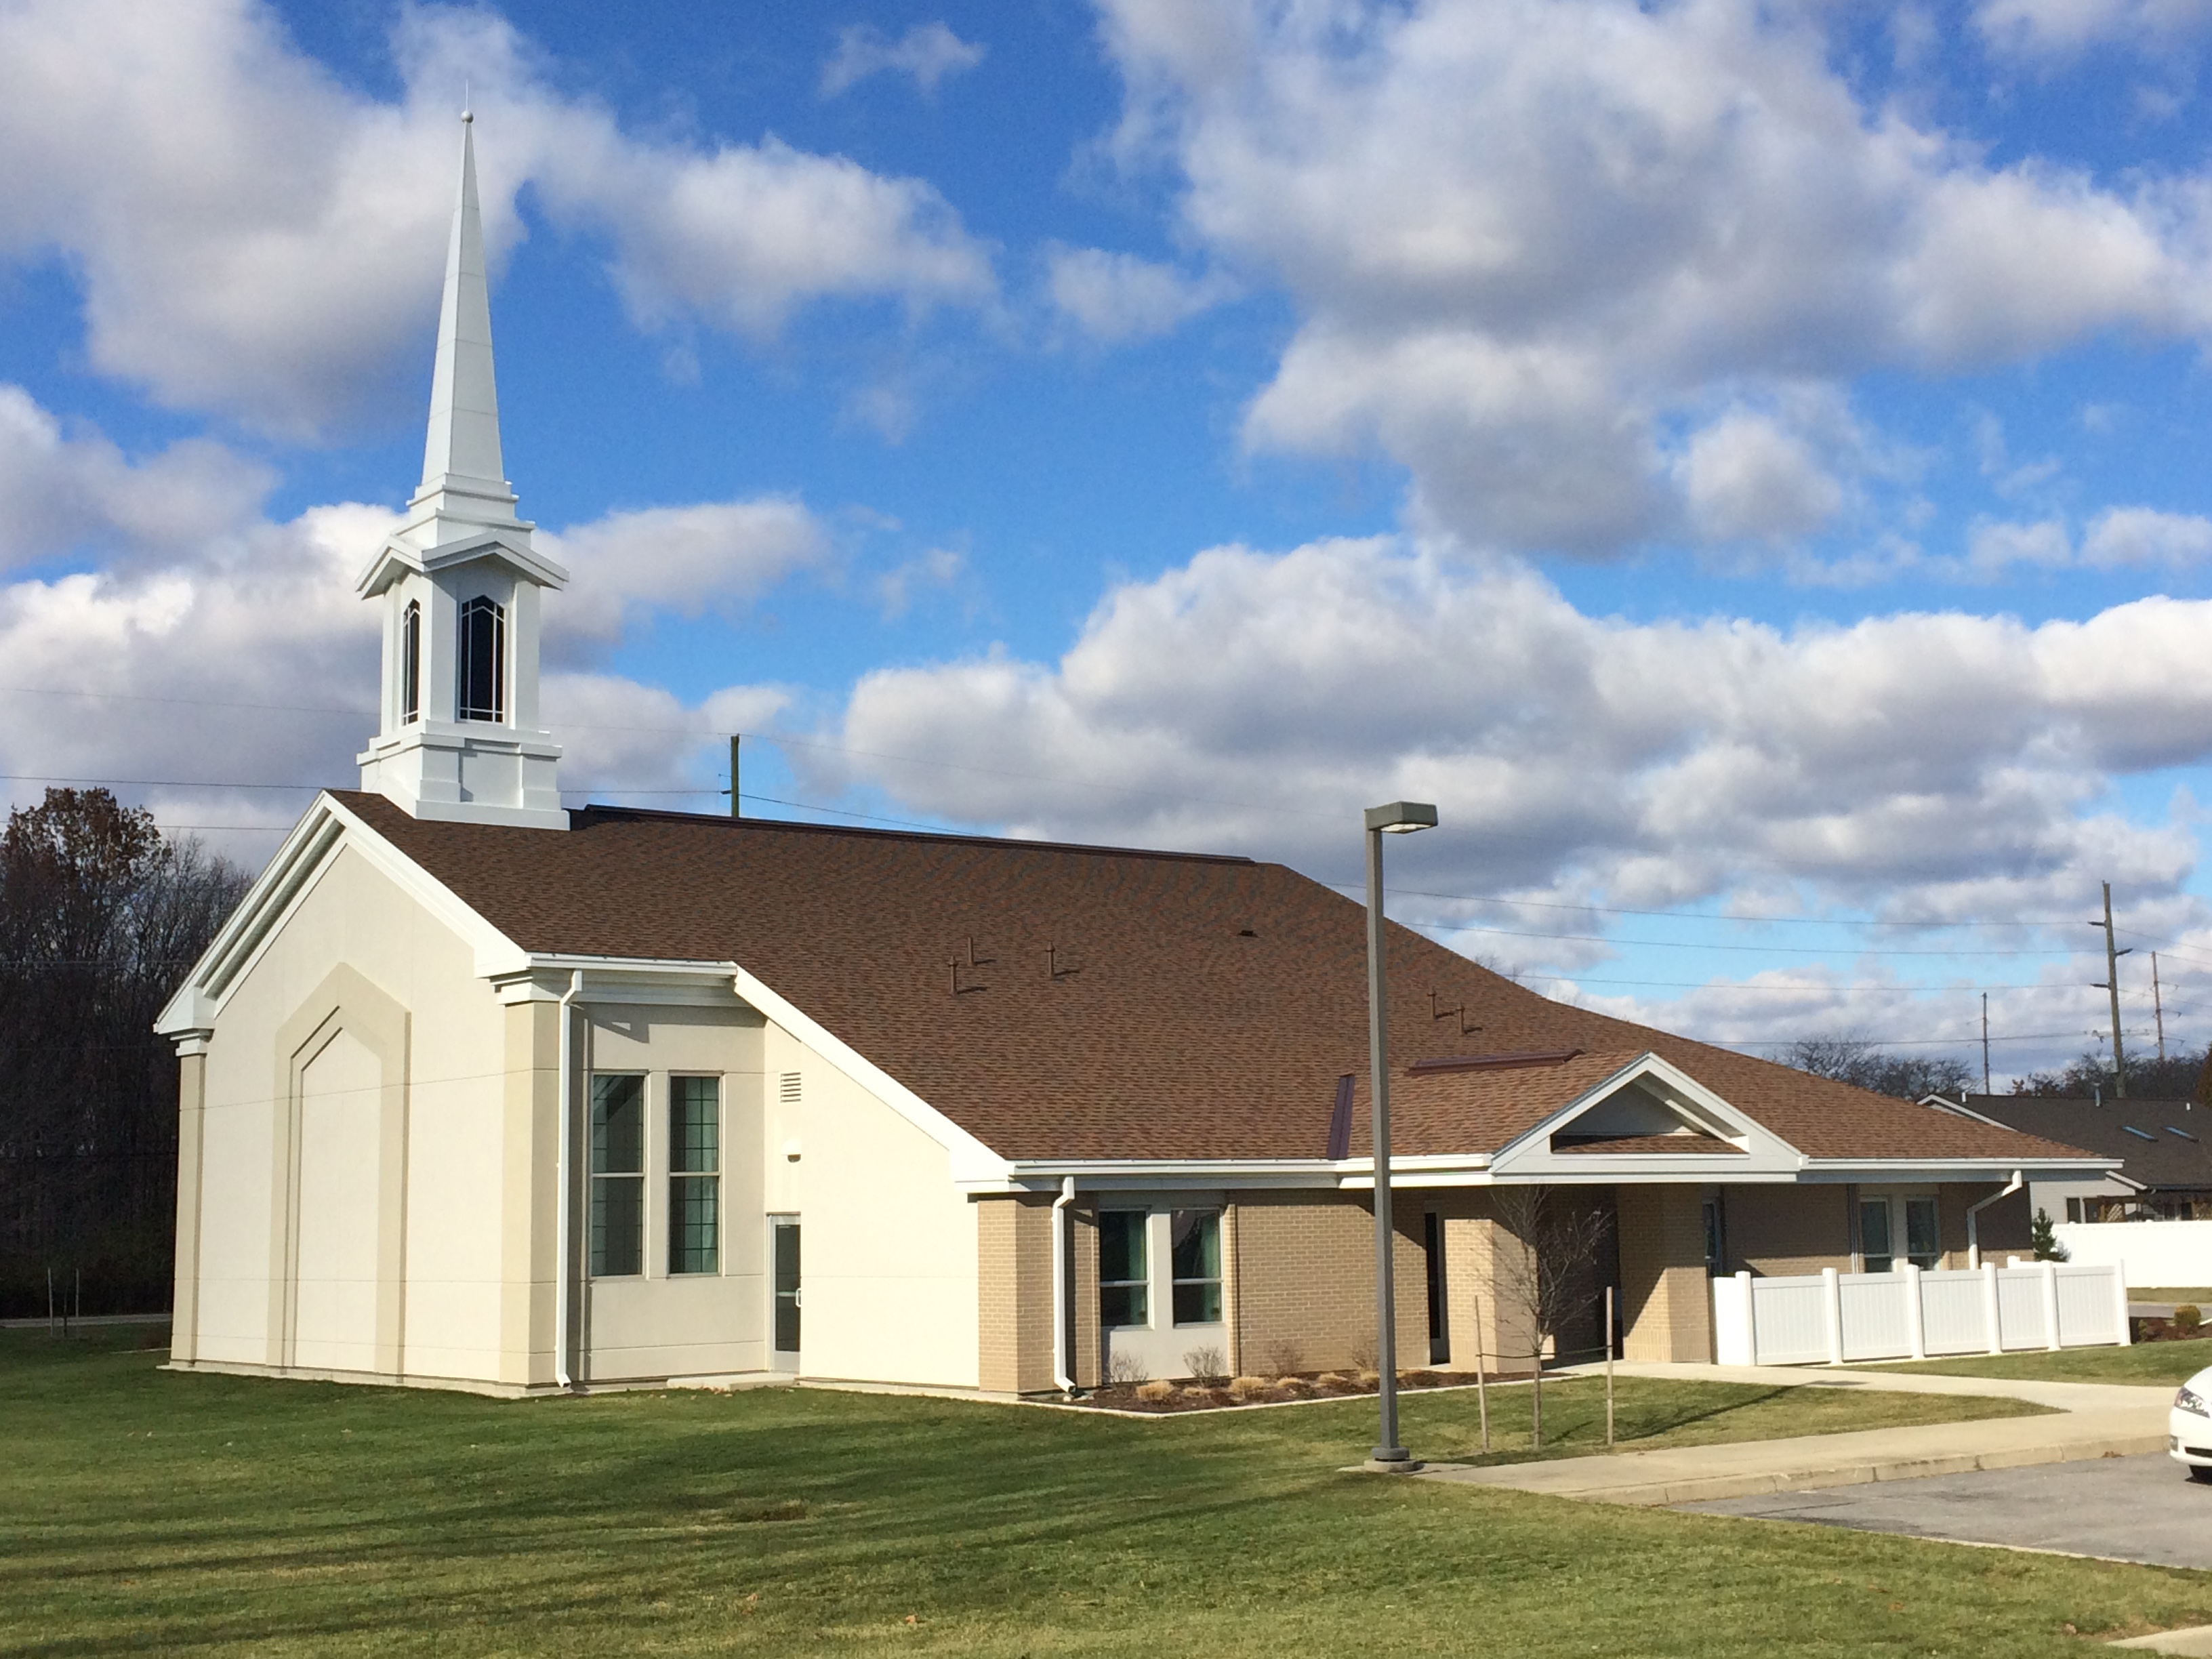 Bryan meetinghouse of the Church of Jesus Christ of Latter-day Saints located at 515 Town Line Road, Bryan, OH 43506.